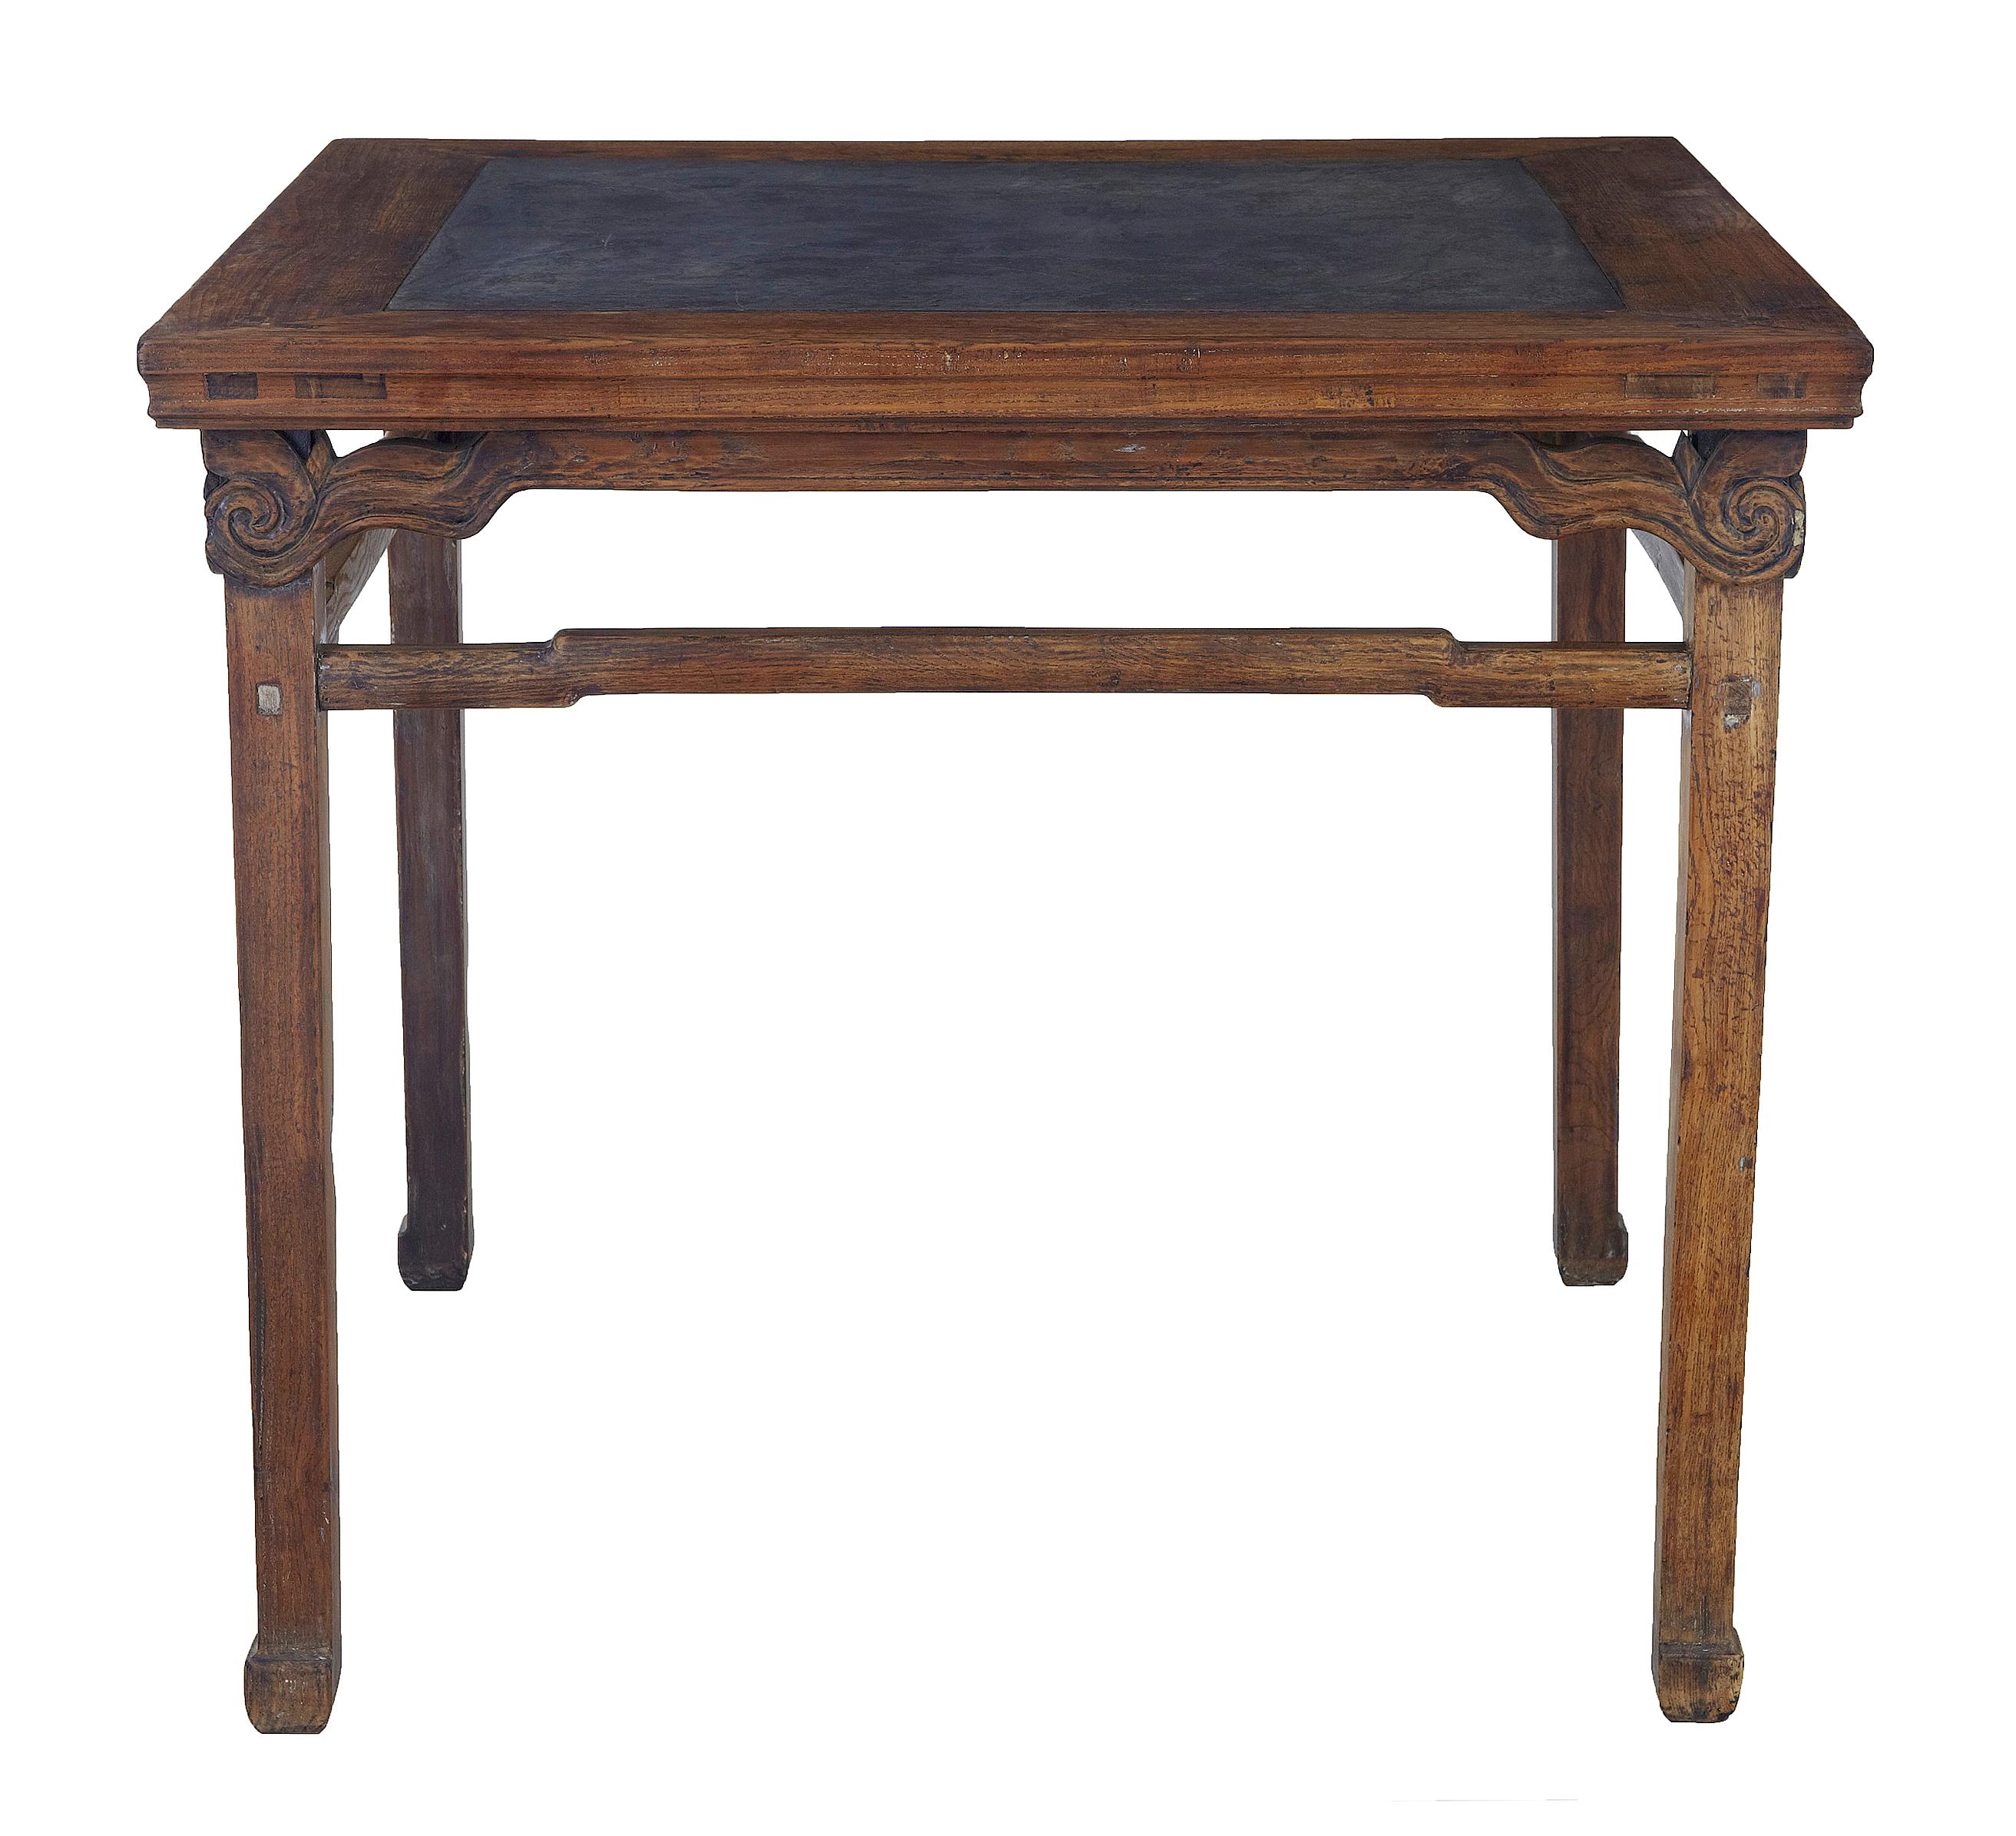 Large 19th century Chinese hard wood marble inset table circa 1880.

Good quality hard wood Chinese table presented in a unpolished dry appearance. Square top with original slate coloured marble top which is inset into the surface.

Carved